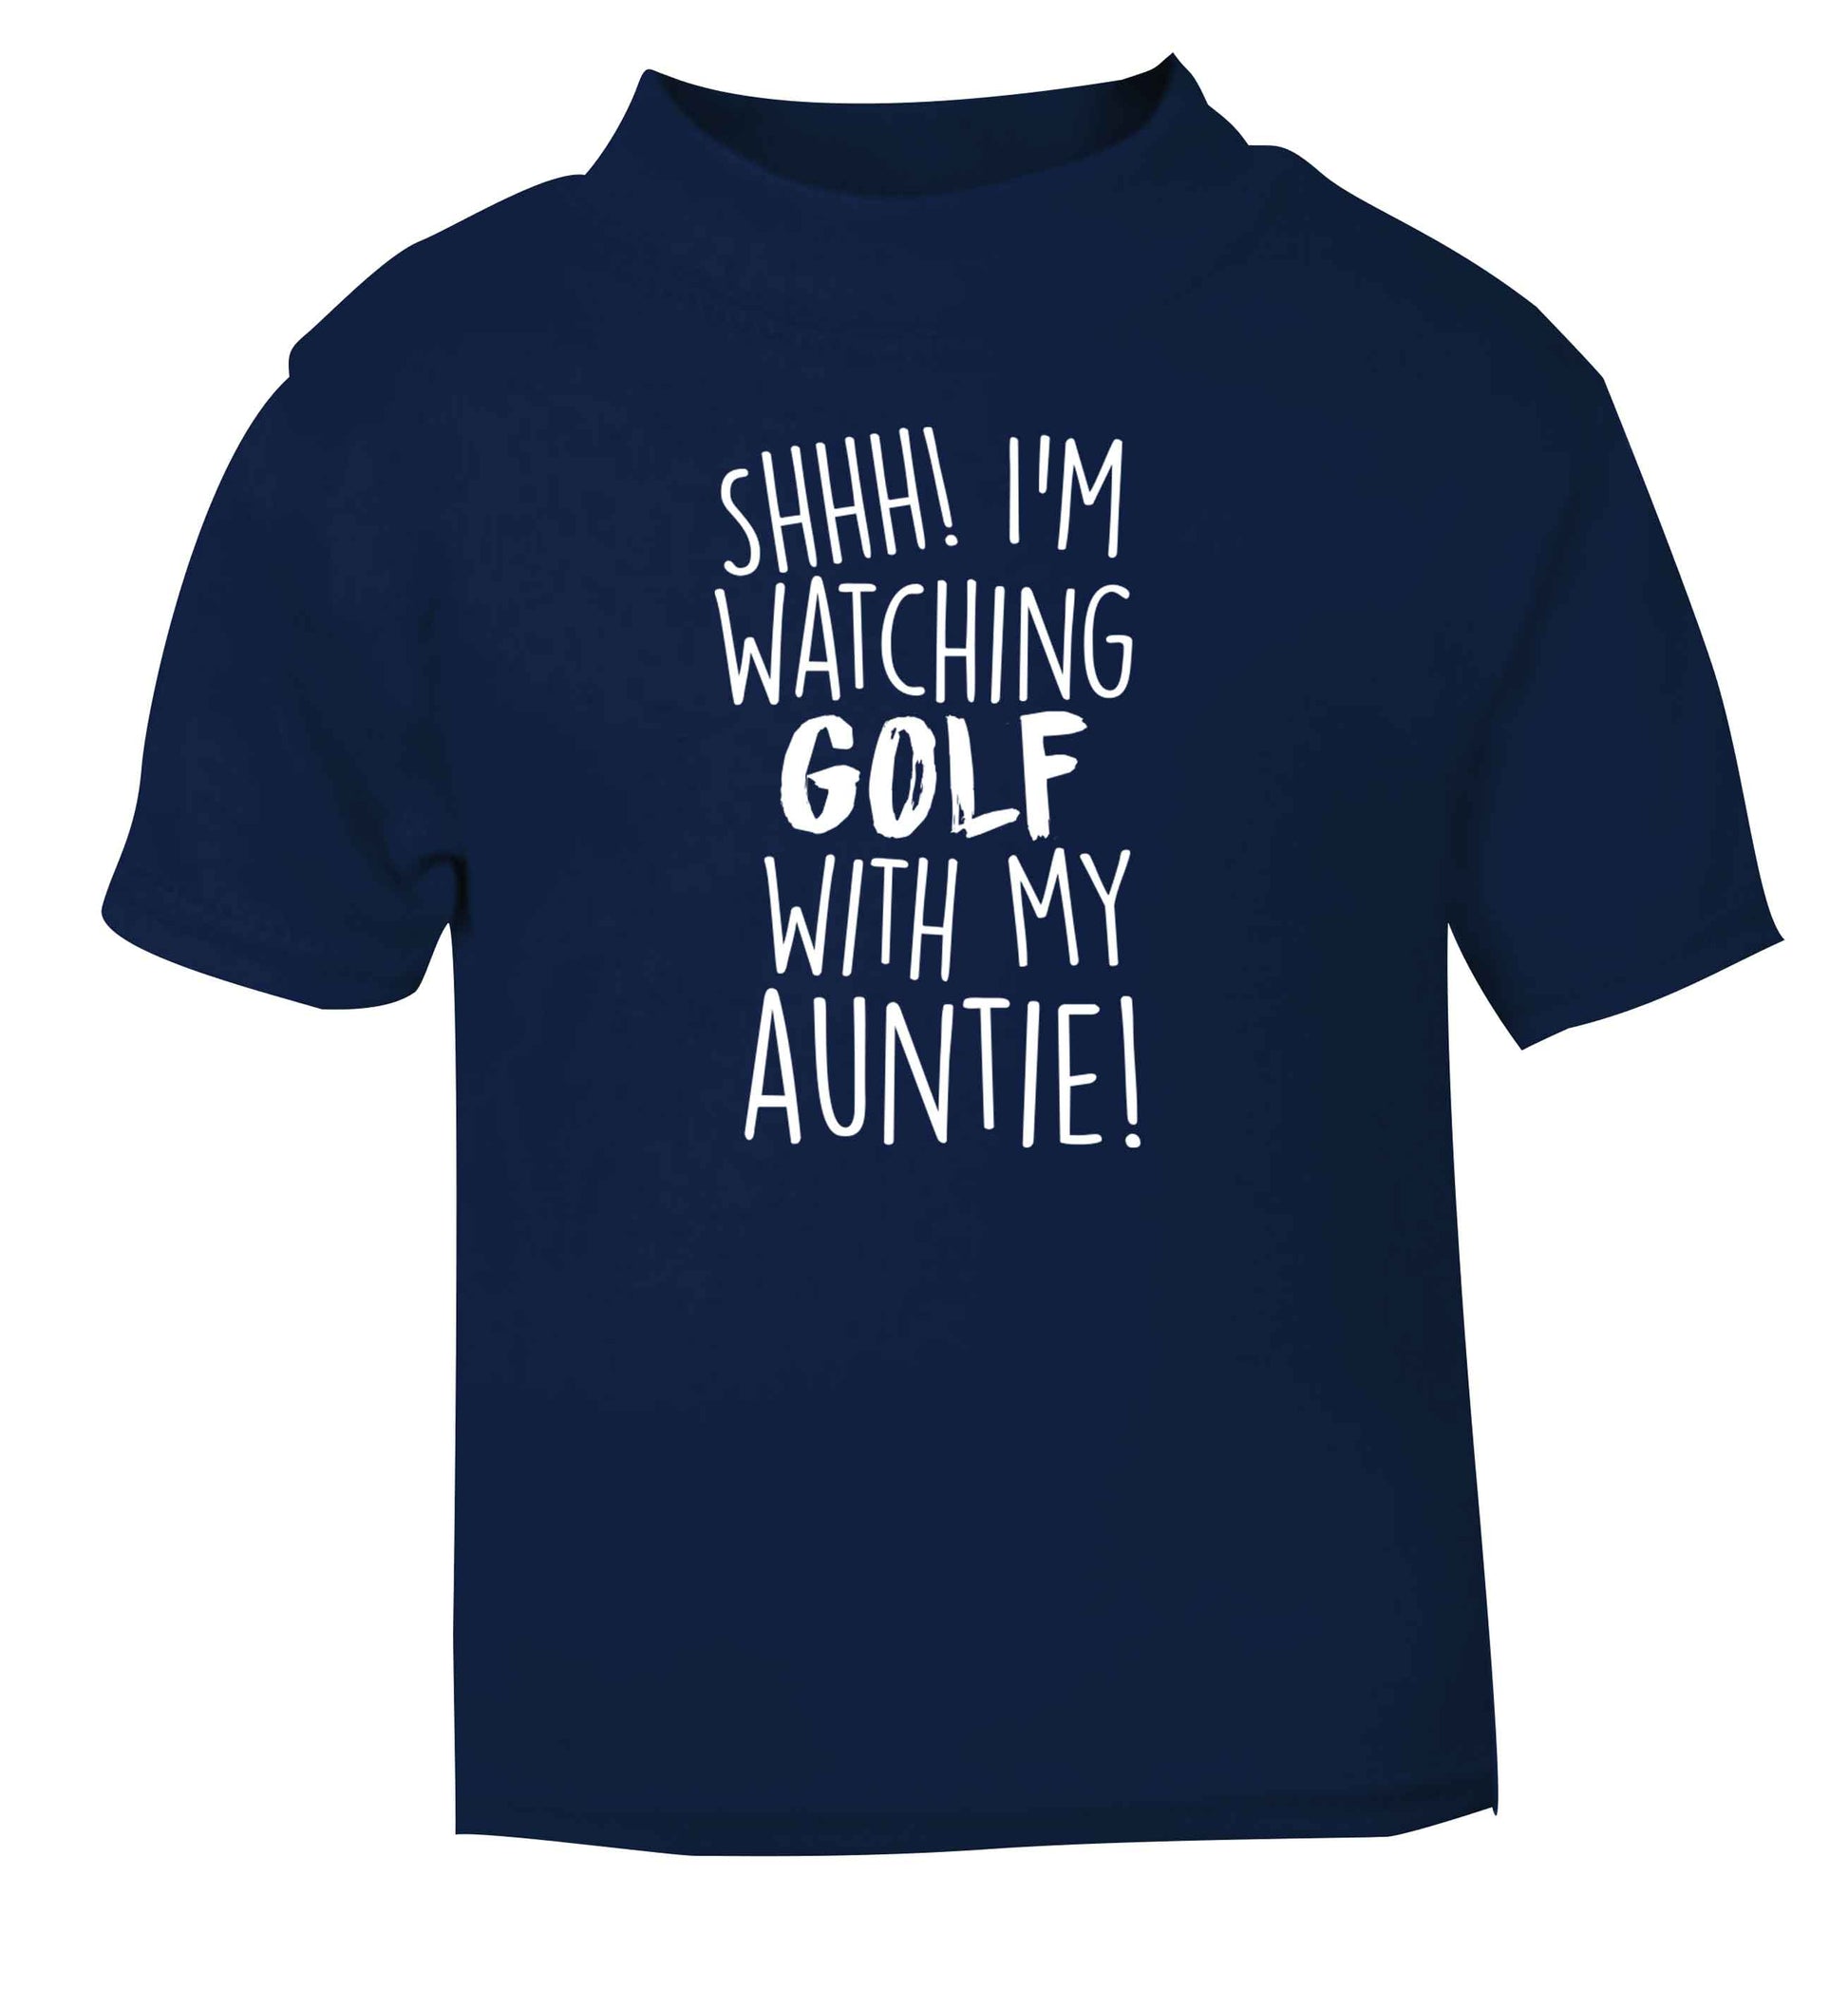 Shh I'm watching golf with my auntie navy Baby Toddler Tshirt 2 Years